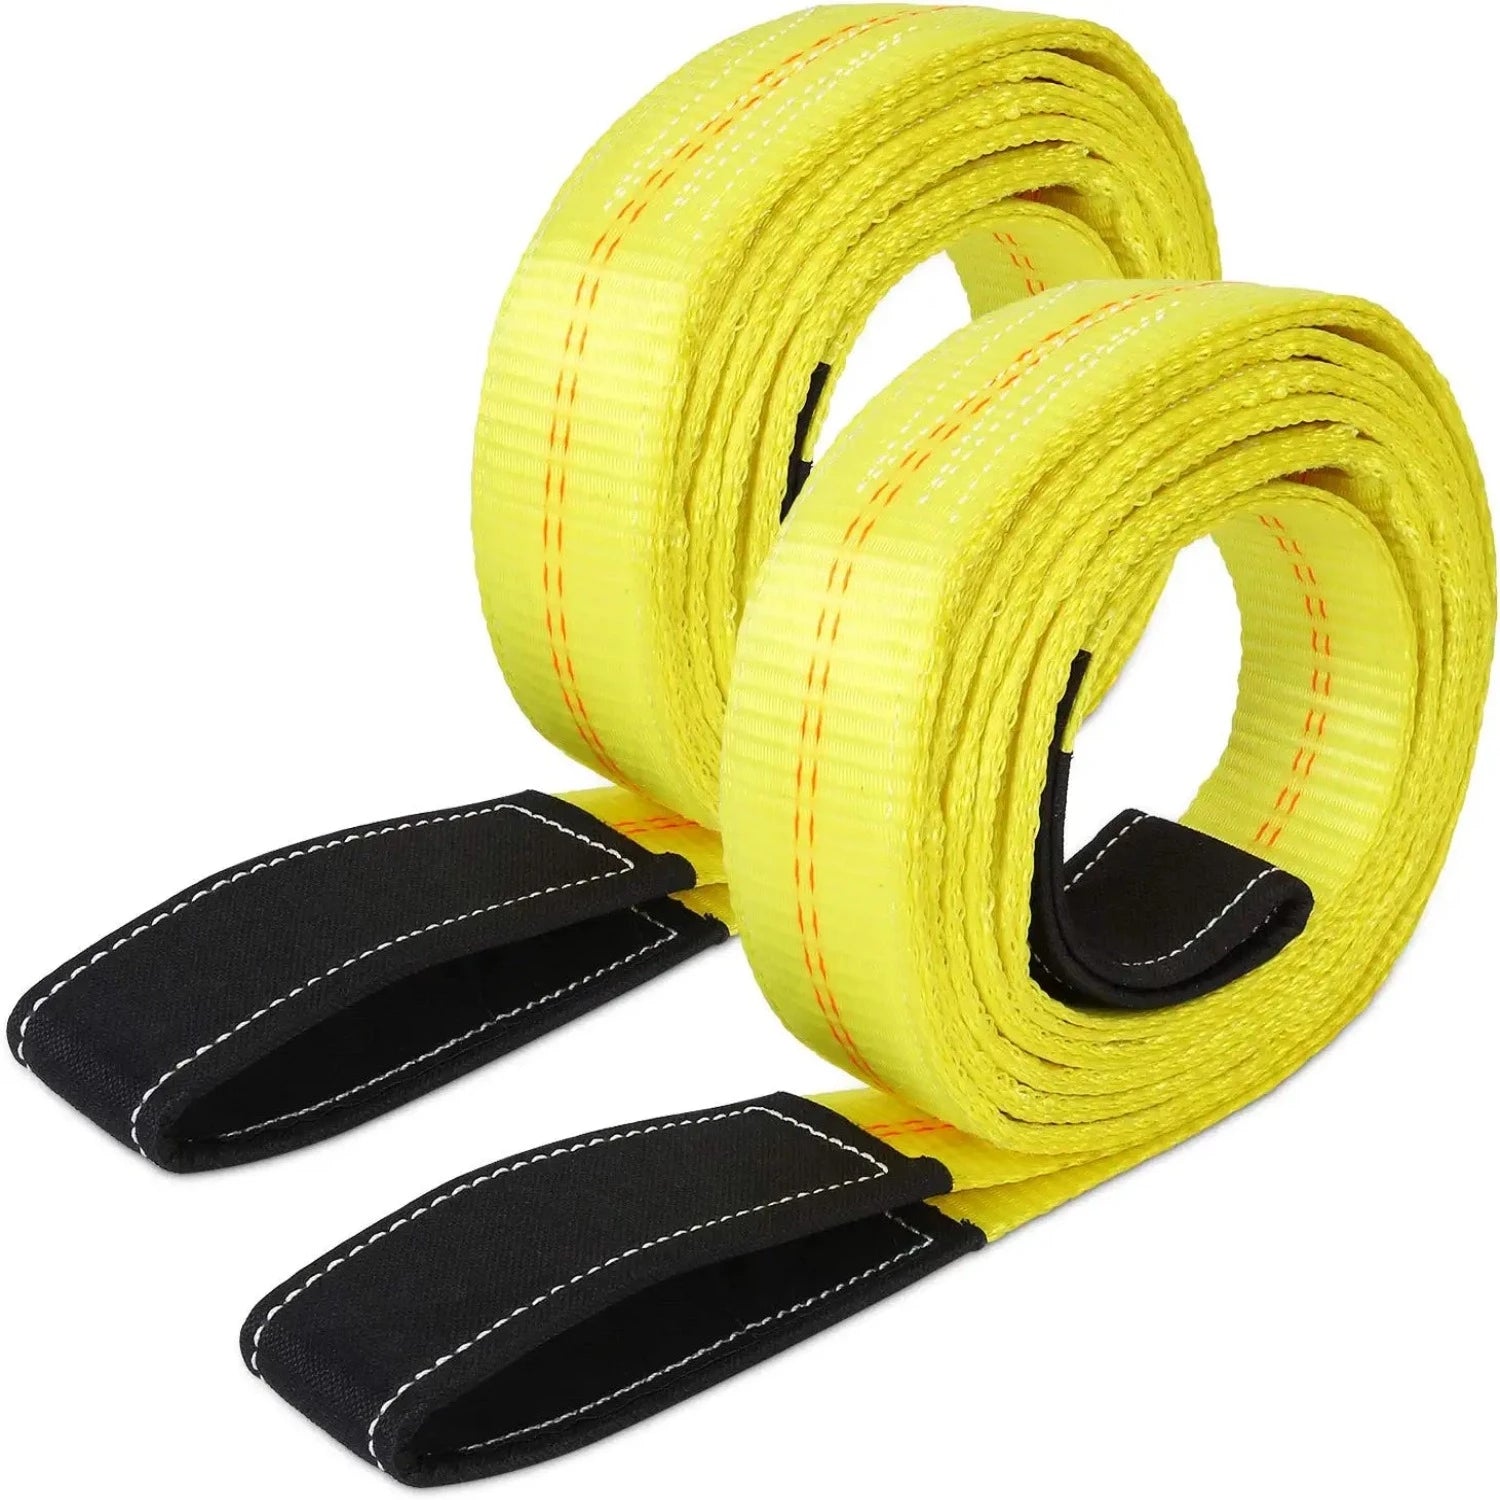 2 Pack 10' x 2" Lift Sling Straps 10,000 Pound Capacity